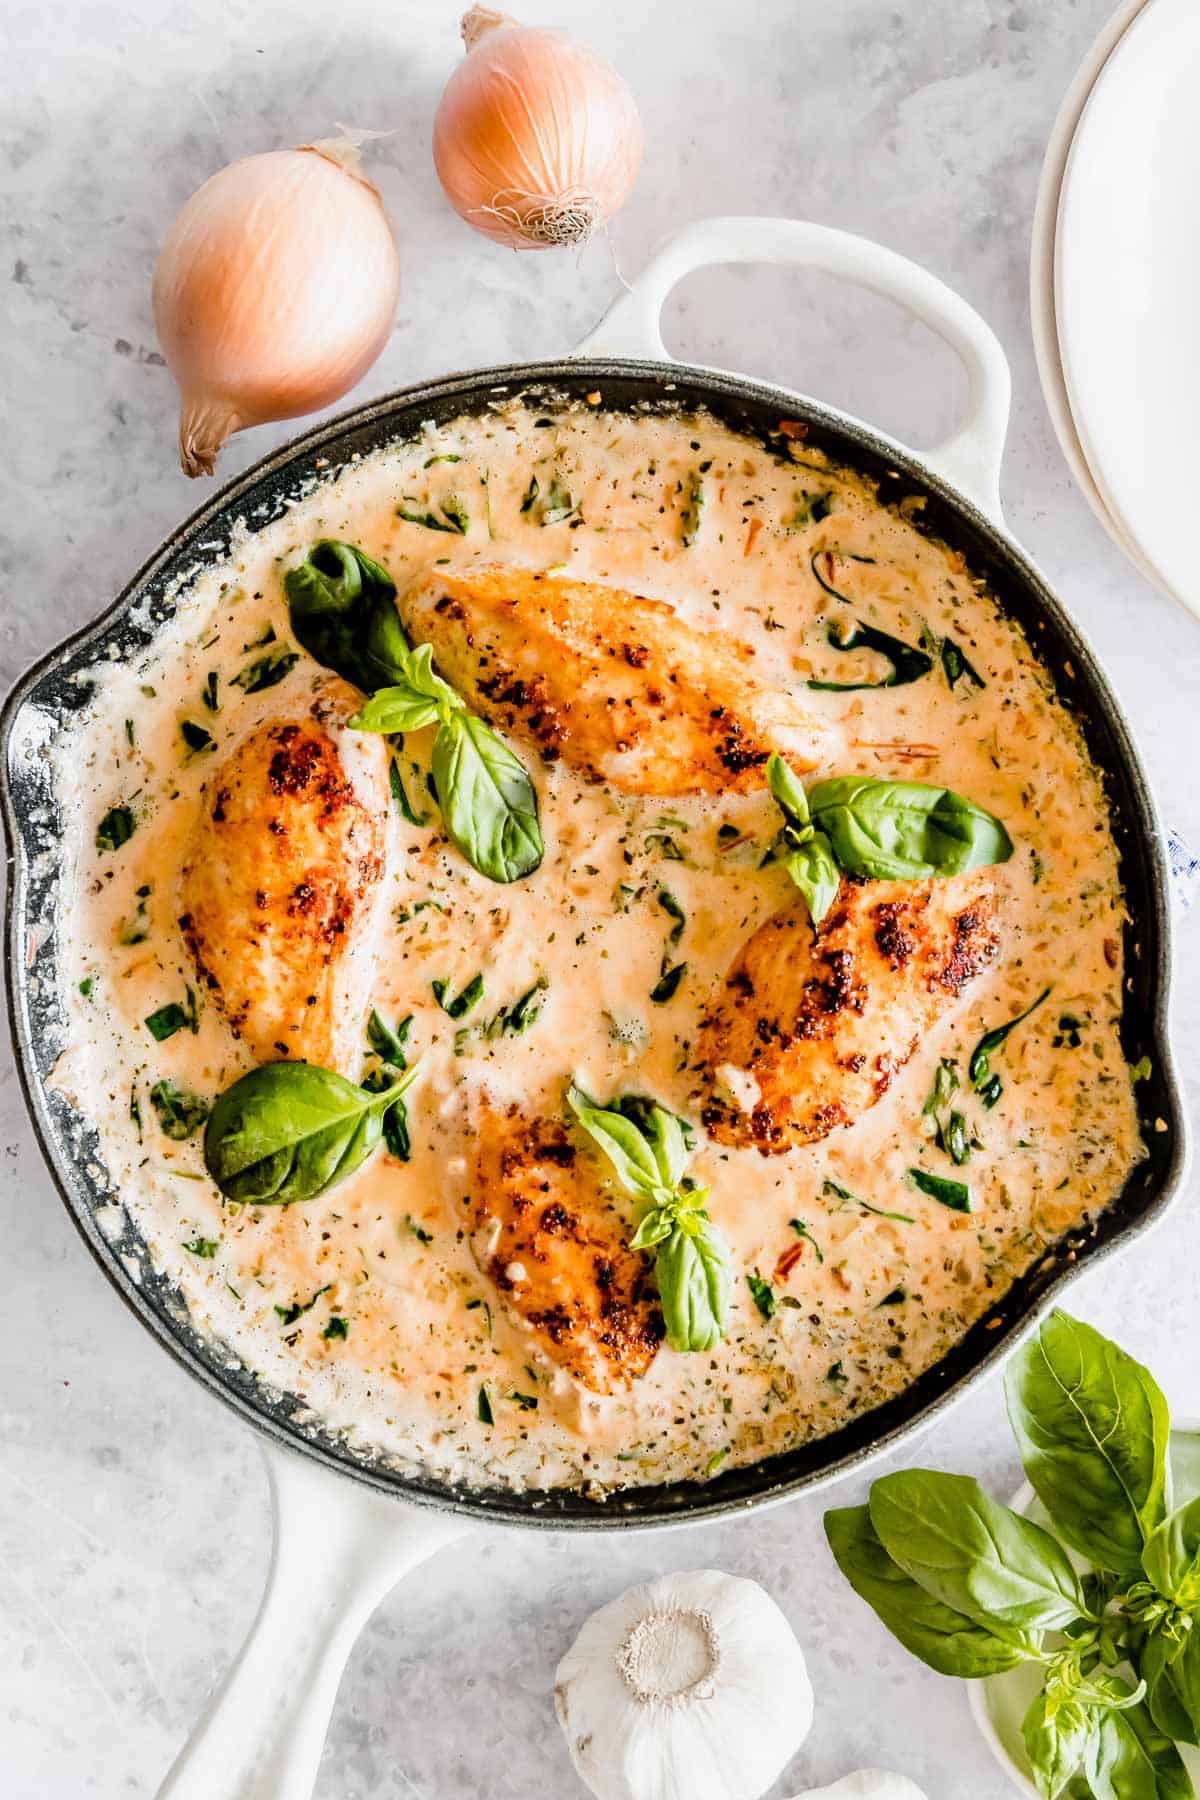 Four pieces of chicken in a creamy sauce in a skillet, garnished with basil, surrounded by onions and garlic on a marble surface.